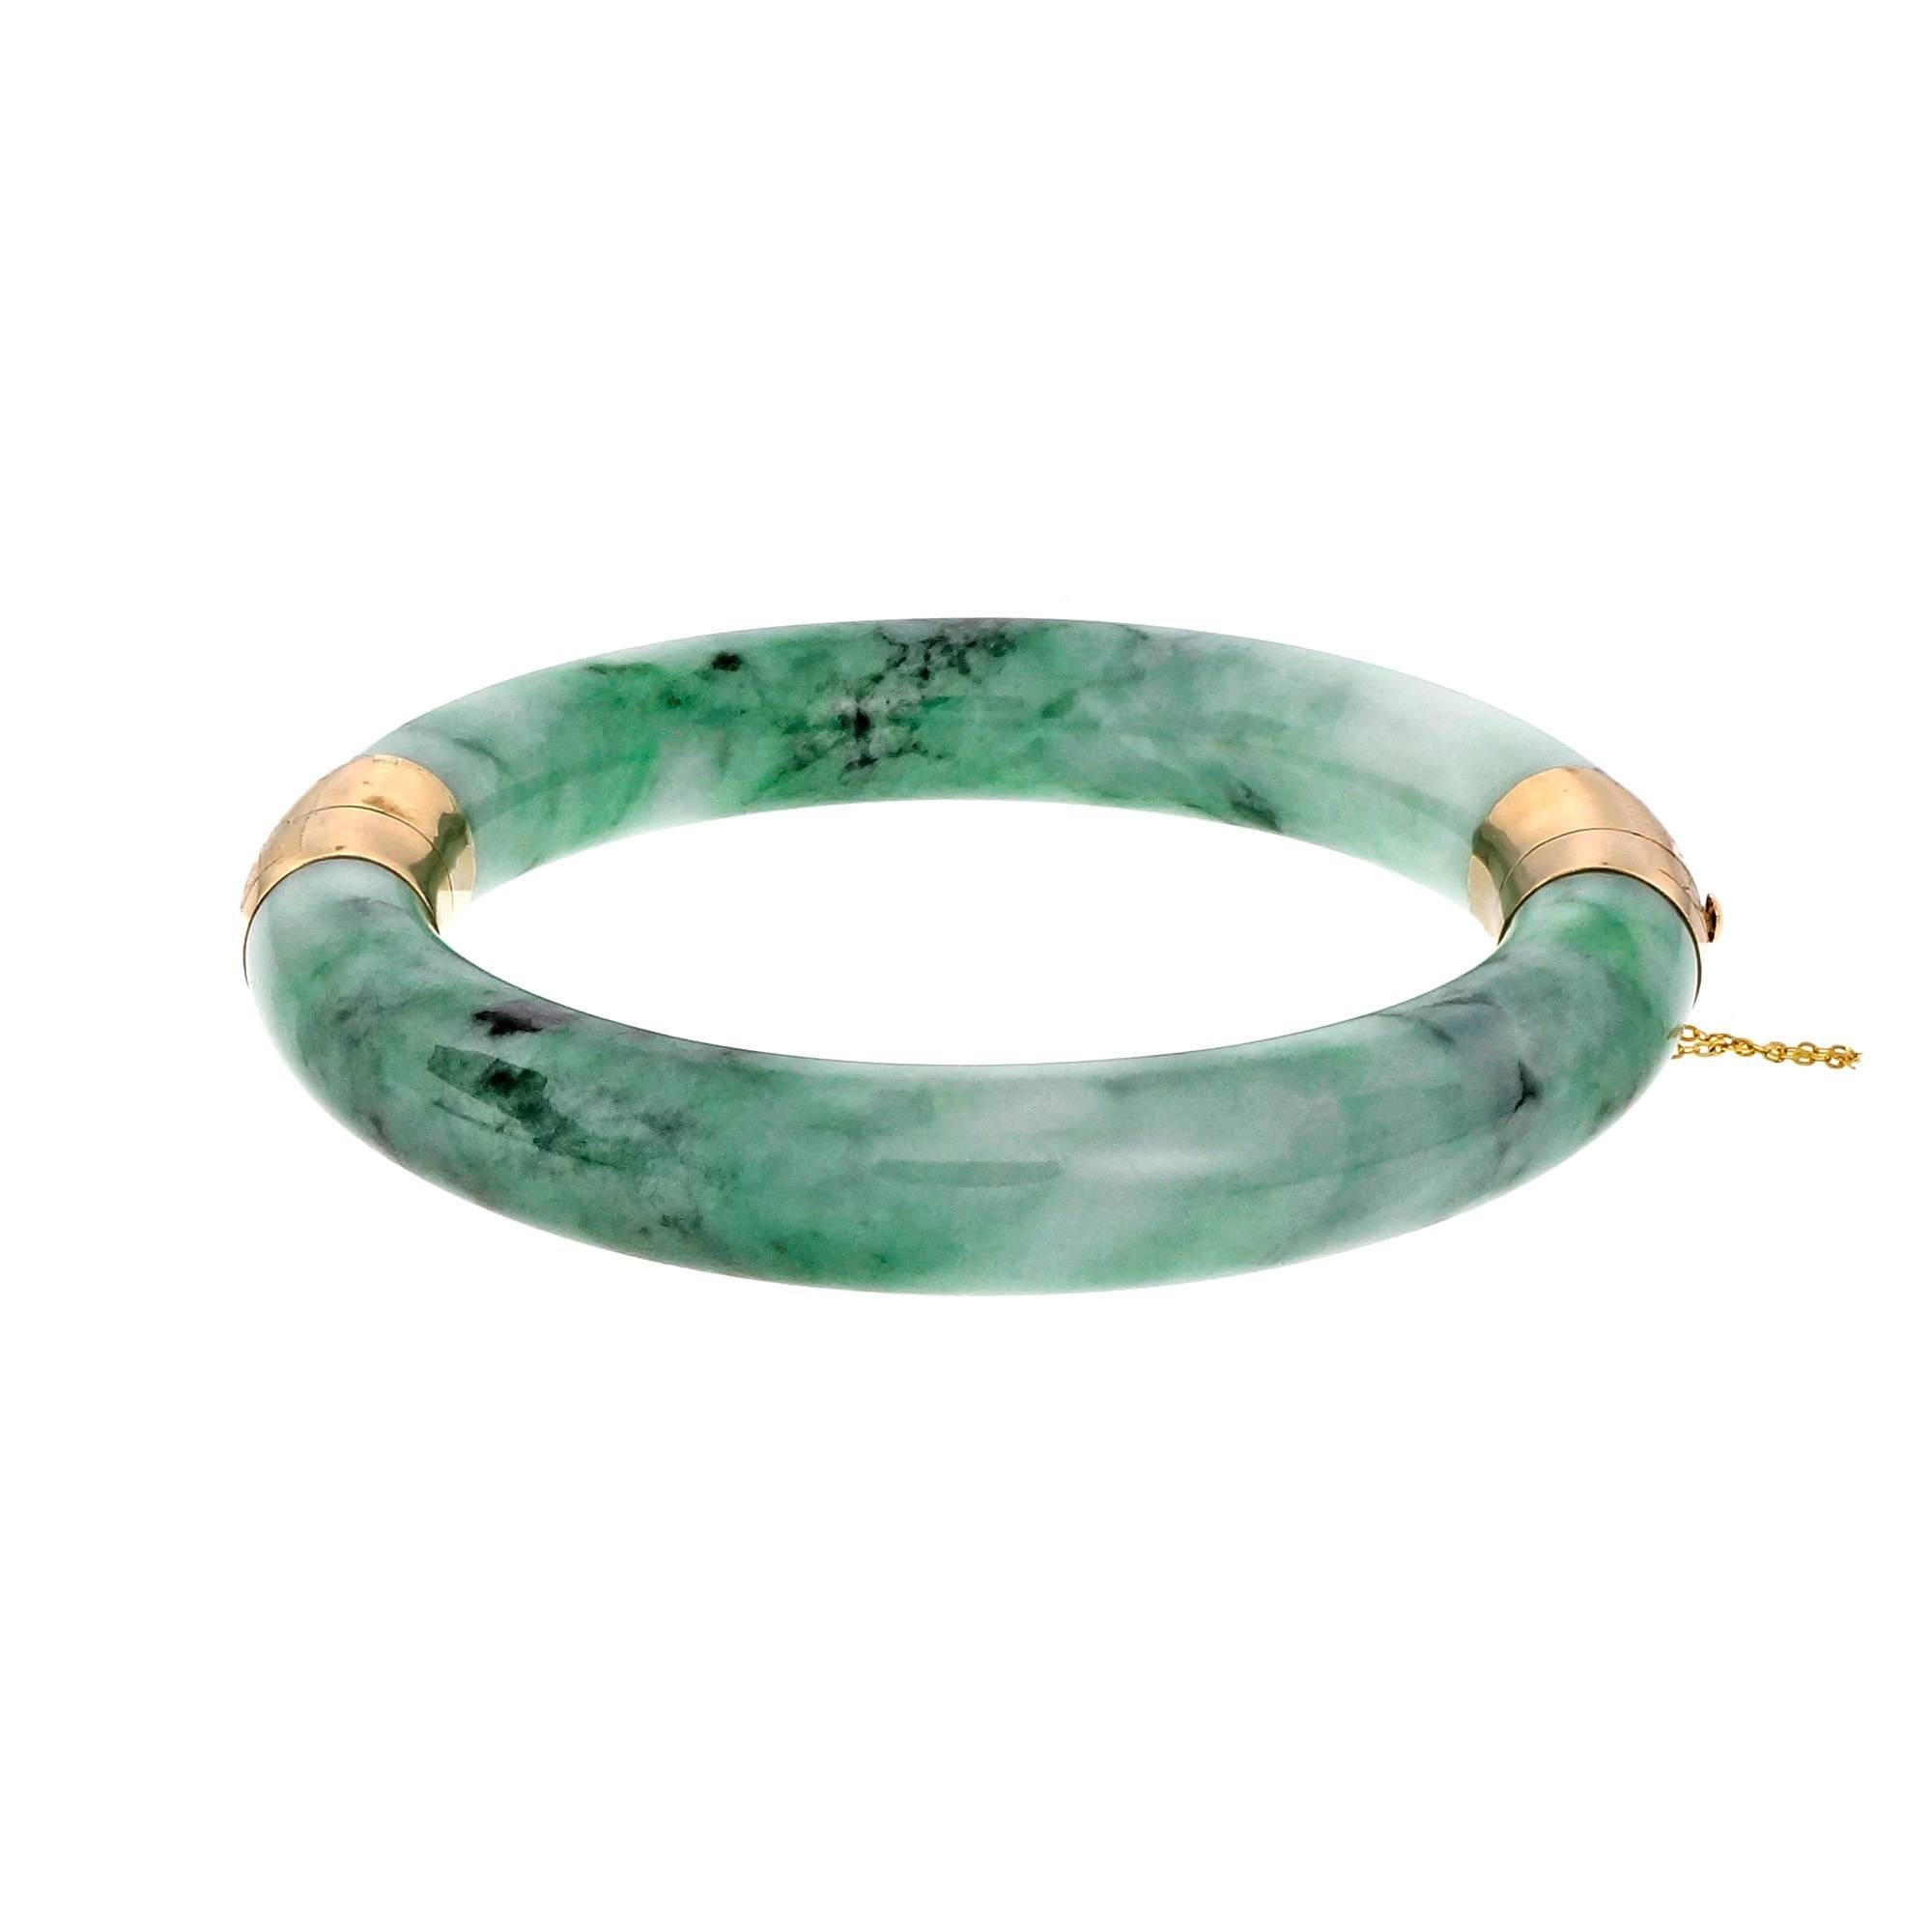 Over-sized hinged Jadeite Jade bright mottled green bangle bracelet with 14k yellow gold hinge catch and safety chain. Goes over a large hand and fits a wrist up to 8.75 inches. GIA certified natural untreated Jadeite Jade.

14k yellow gold
2